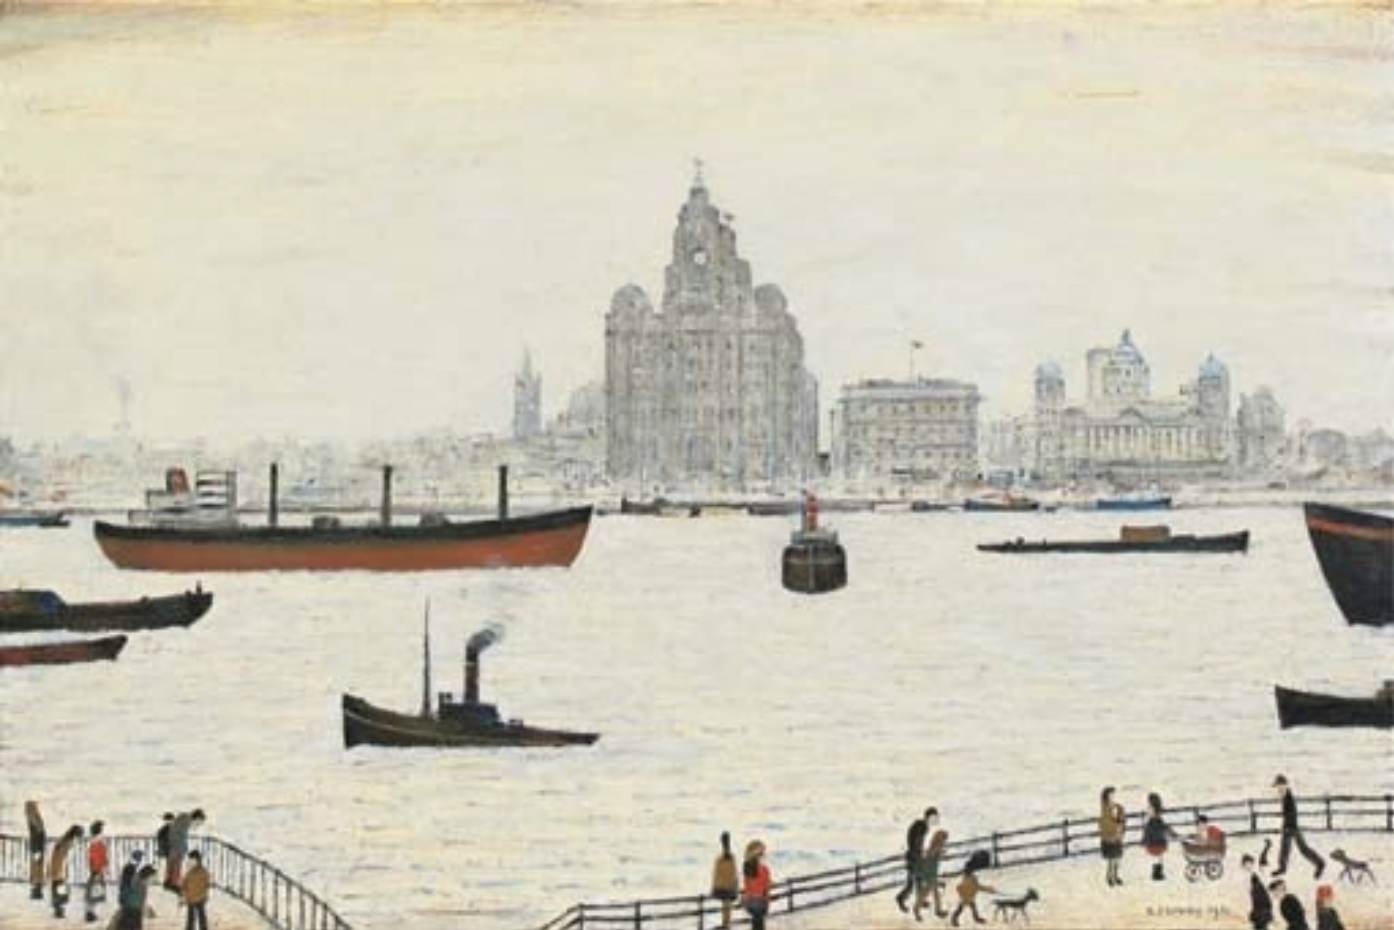 The Liver Buildings, Liverpool (1962) by Laurence Stephen Lowry (1887 - 1976), English artist.